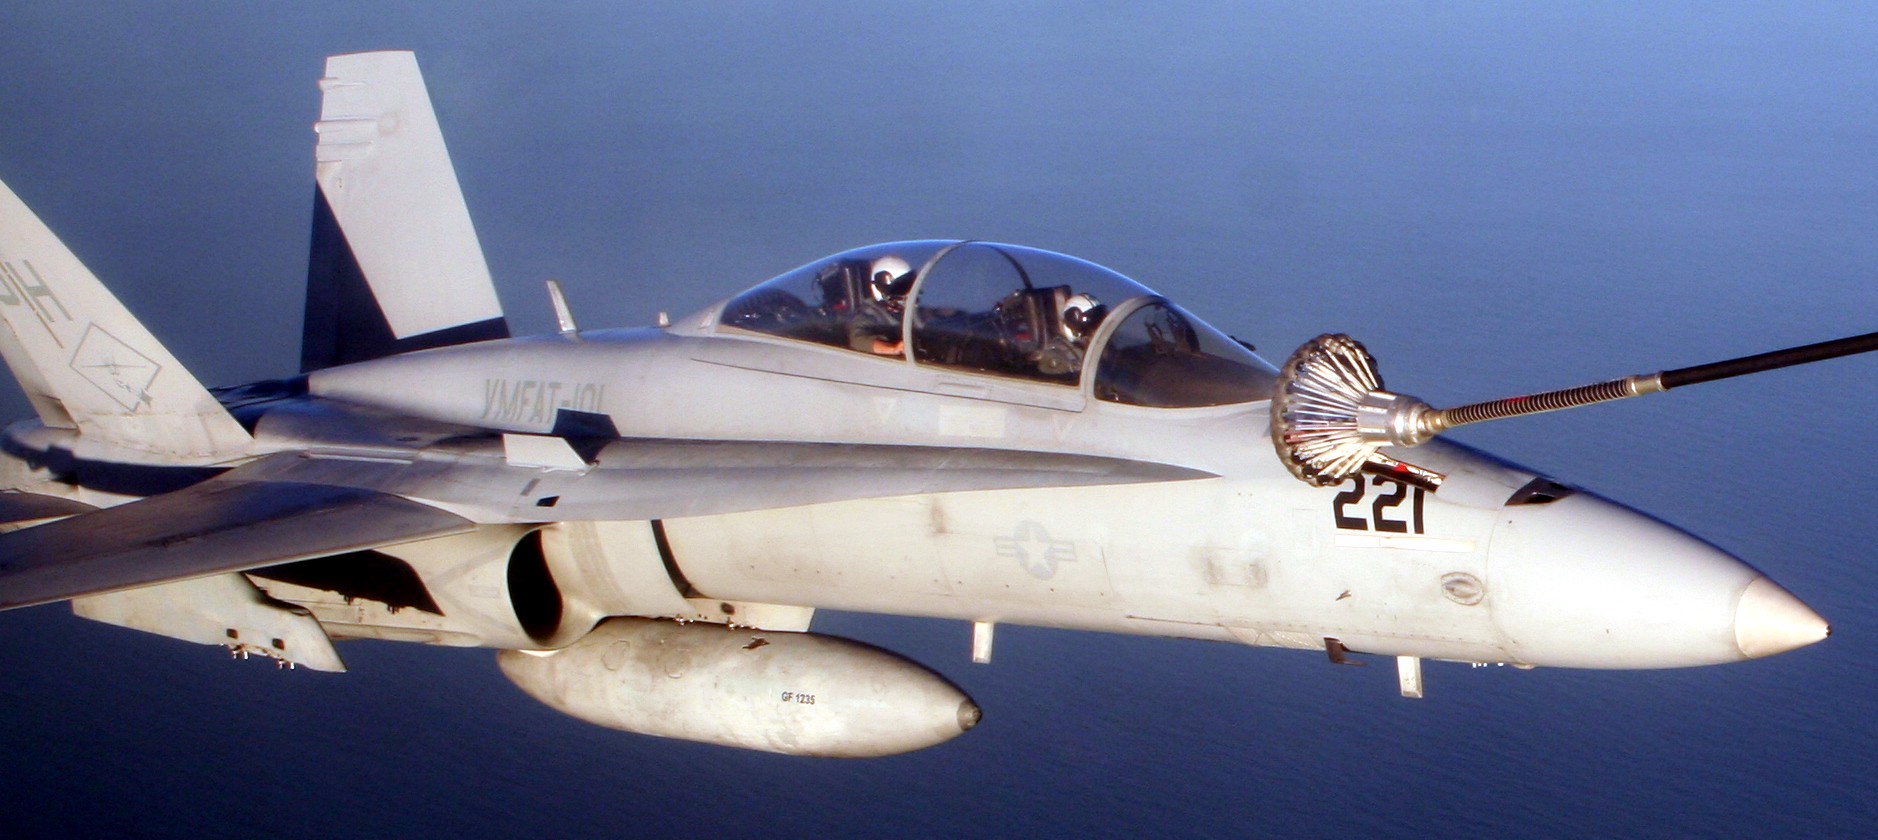 vmfat-101 sharpshooters marine fighter attack training squadron f/a-18b hornet 70